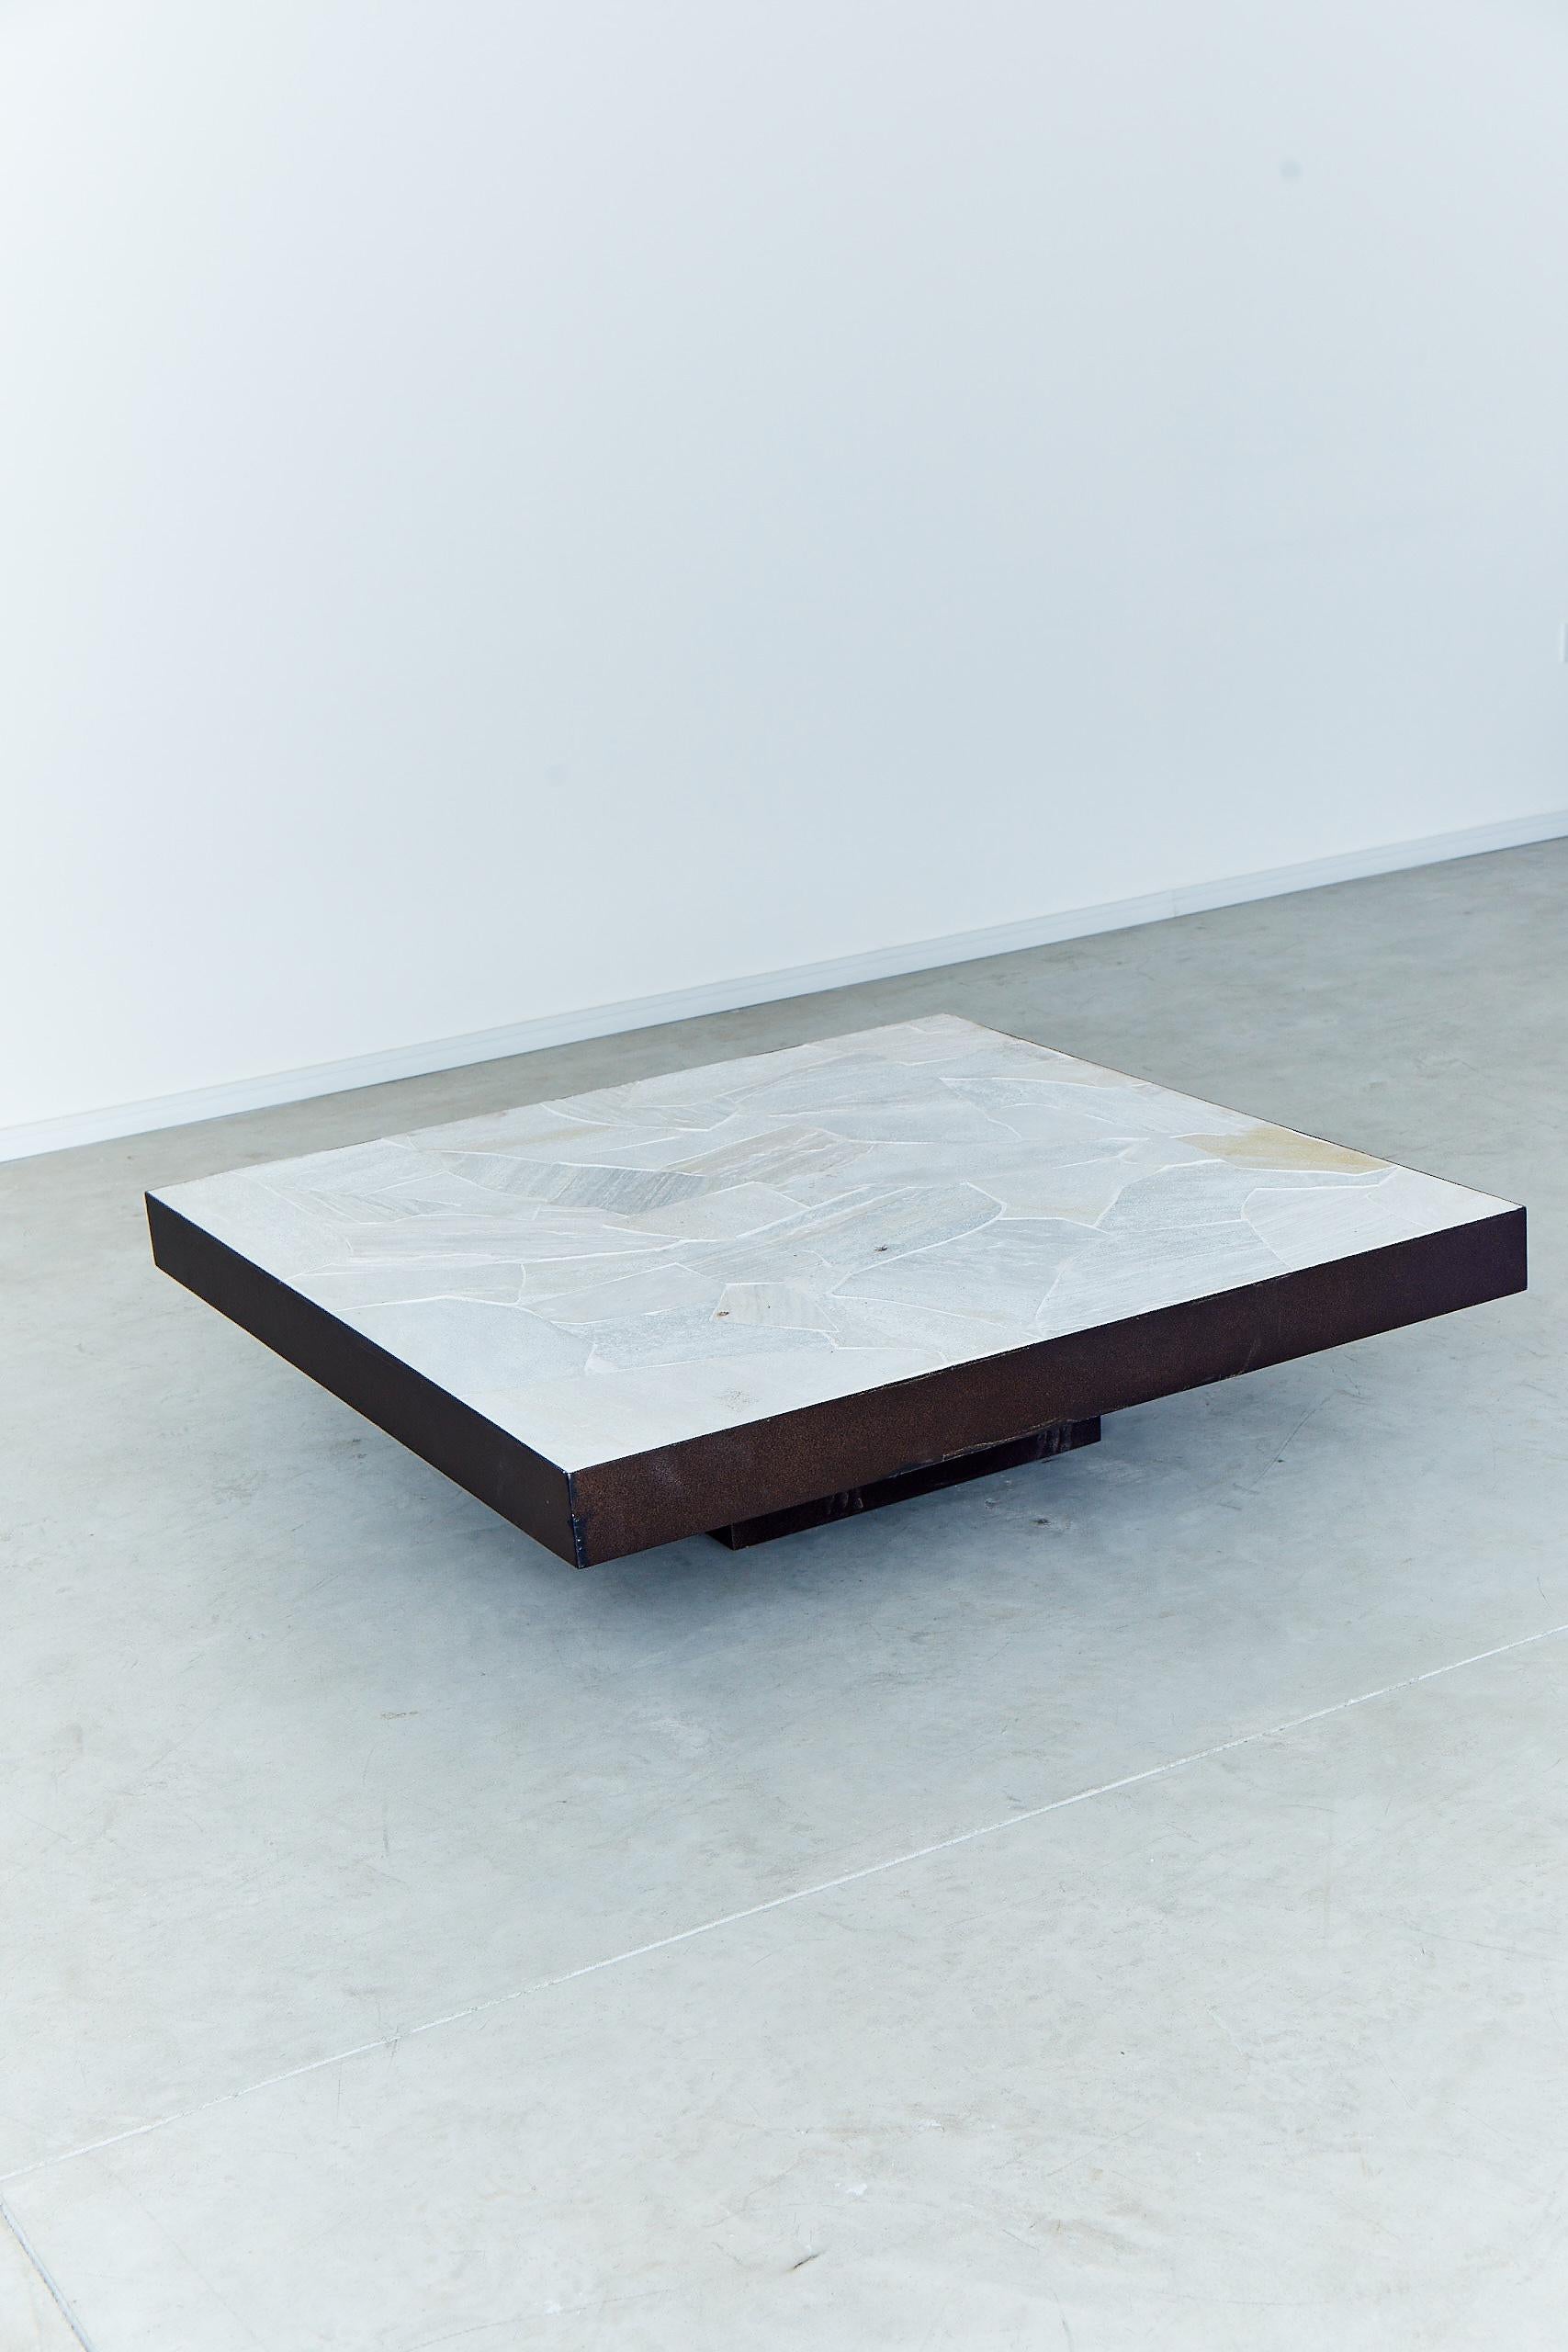 The Tiles coffee table, designed by Arthur Casas is a solid and elegant creation with a view on minimalistic design. The structure is made of steel and the top is made of a beautiful stone called 